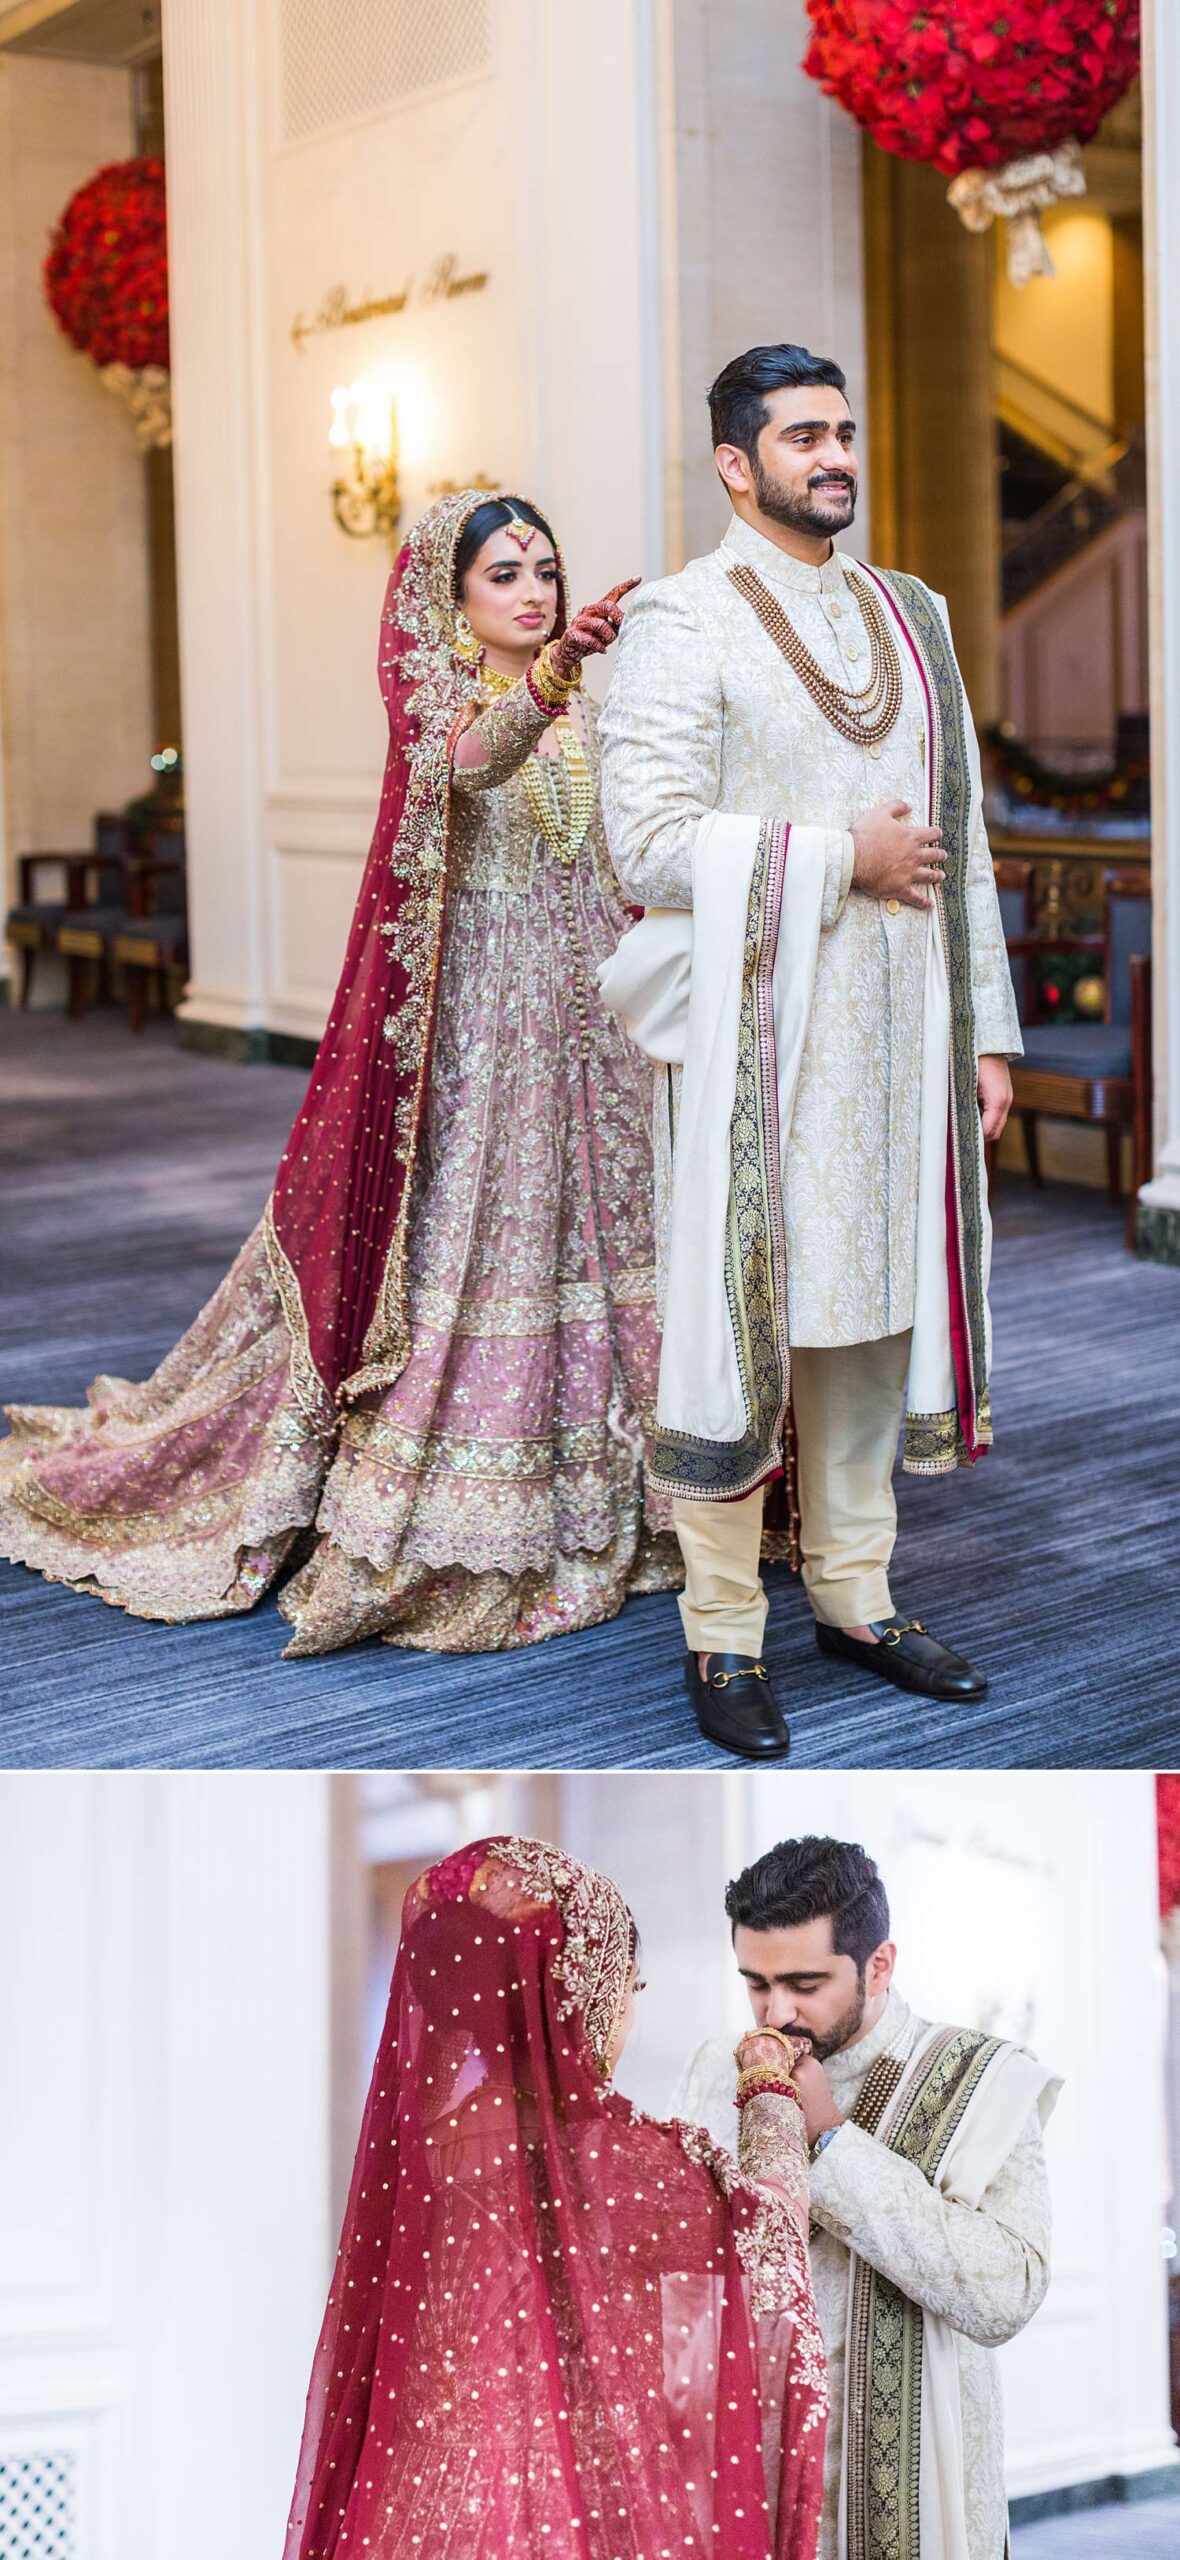 Pakistani wedding couple first look at Hilton Chicago photographed by Maha Studios photographer team